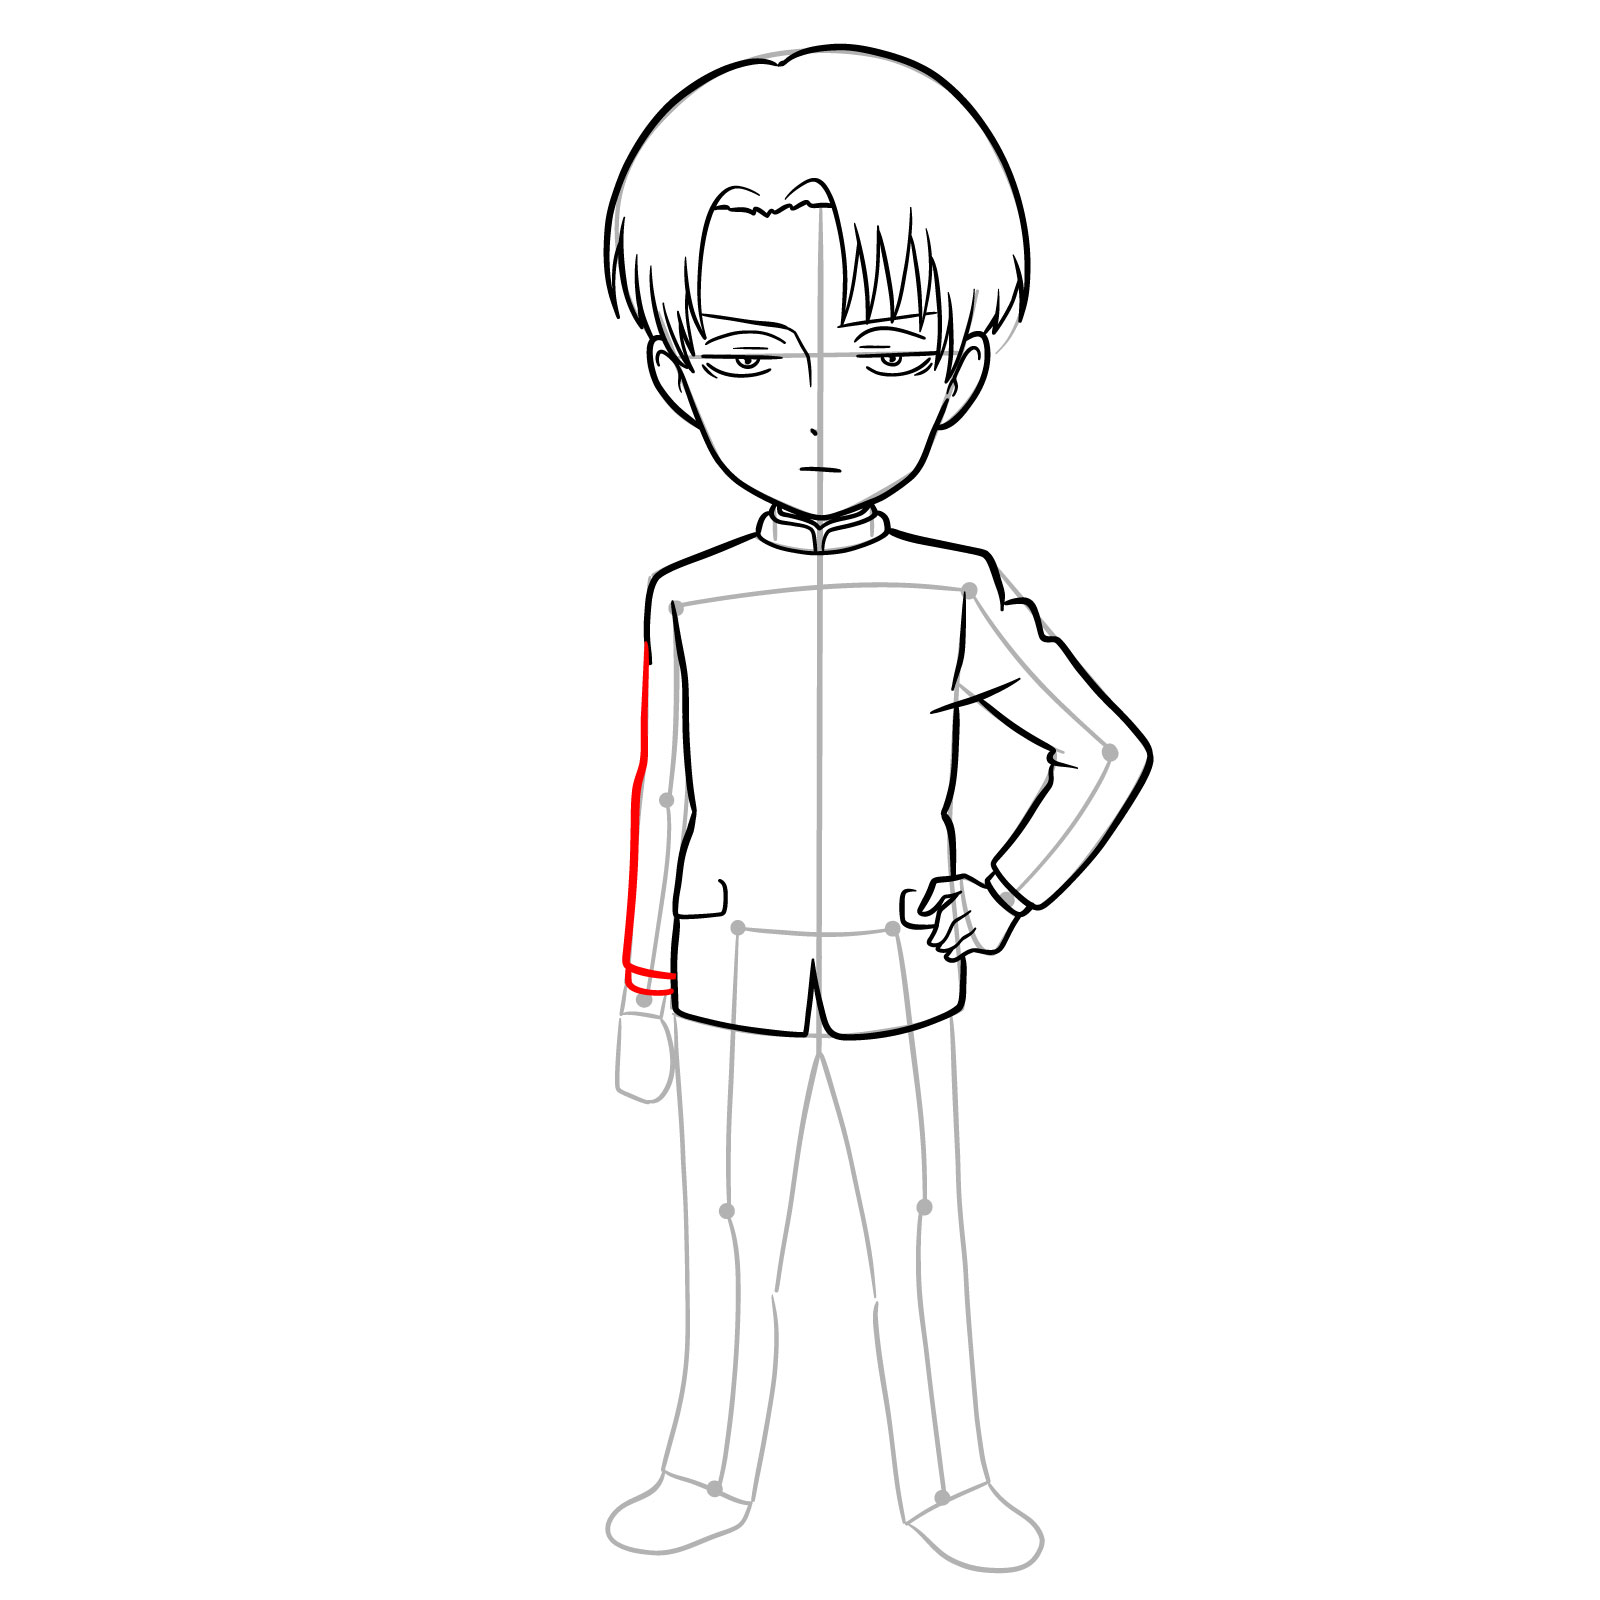 Chibi Levi drawing with the second sleeve being added - step 14